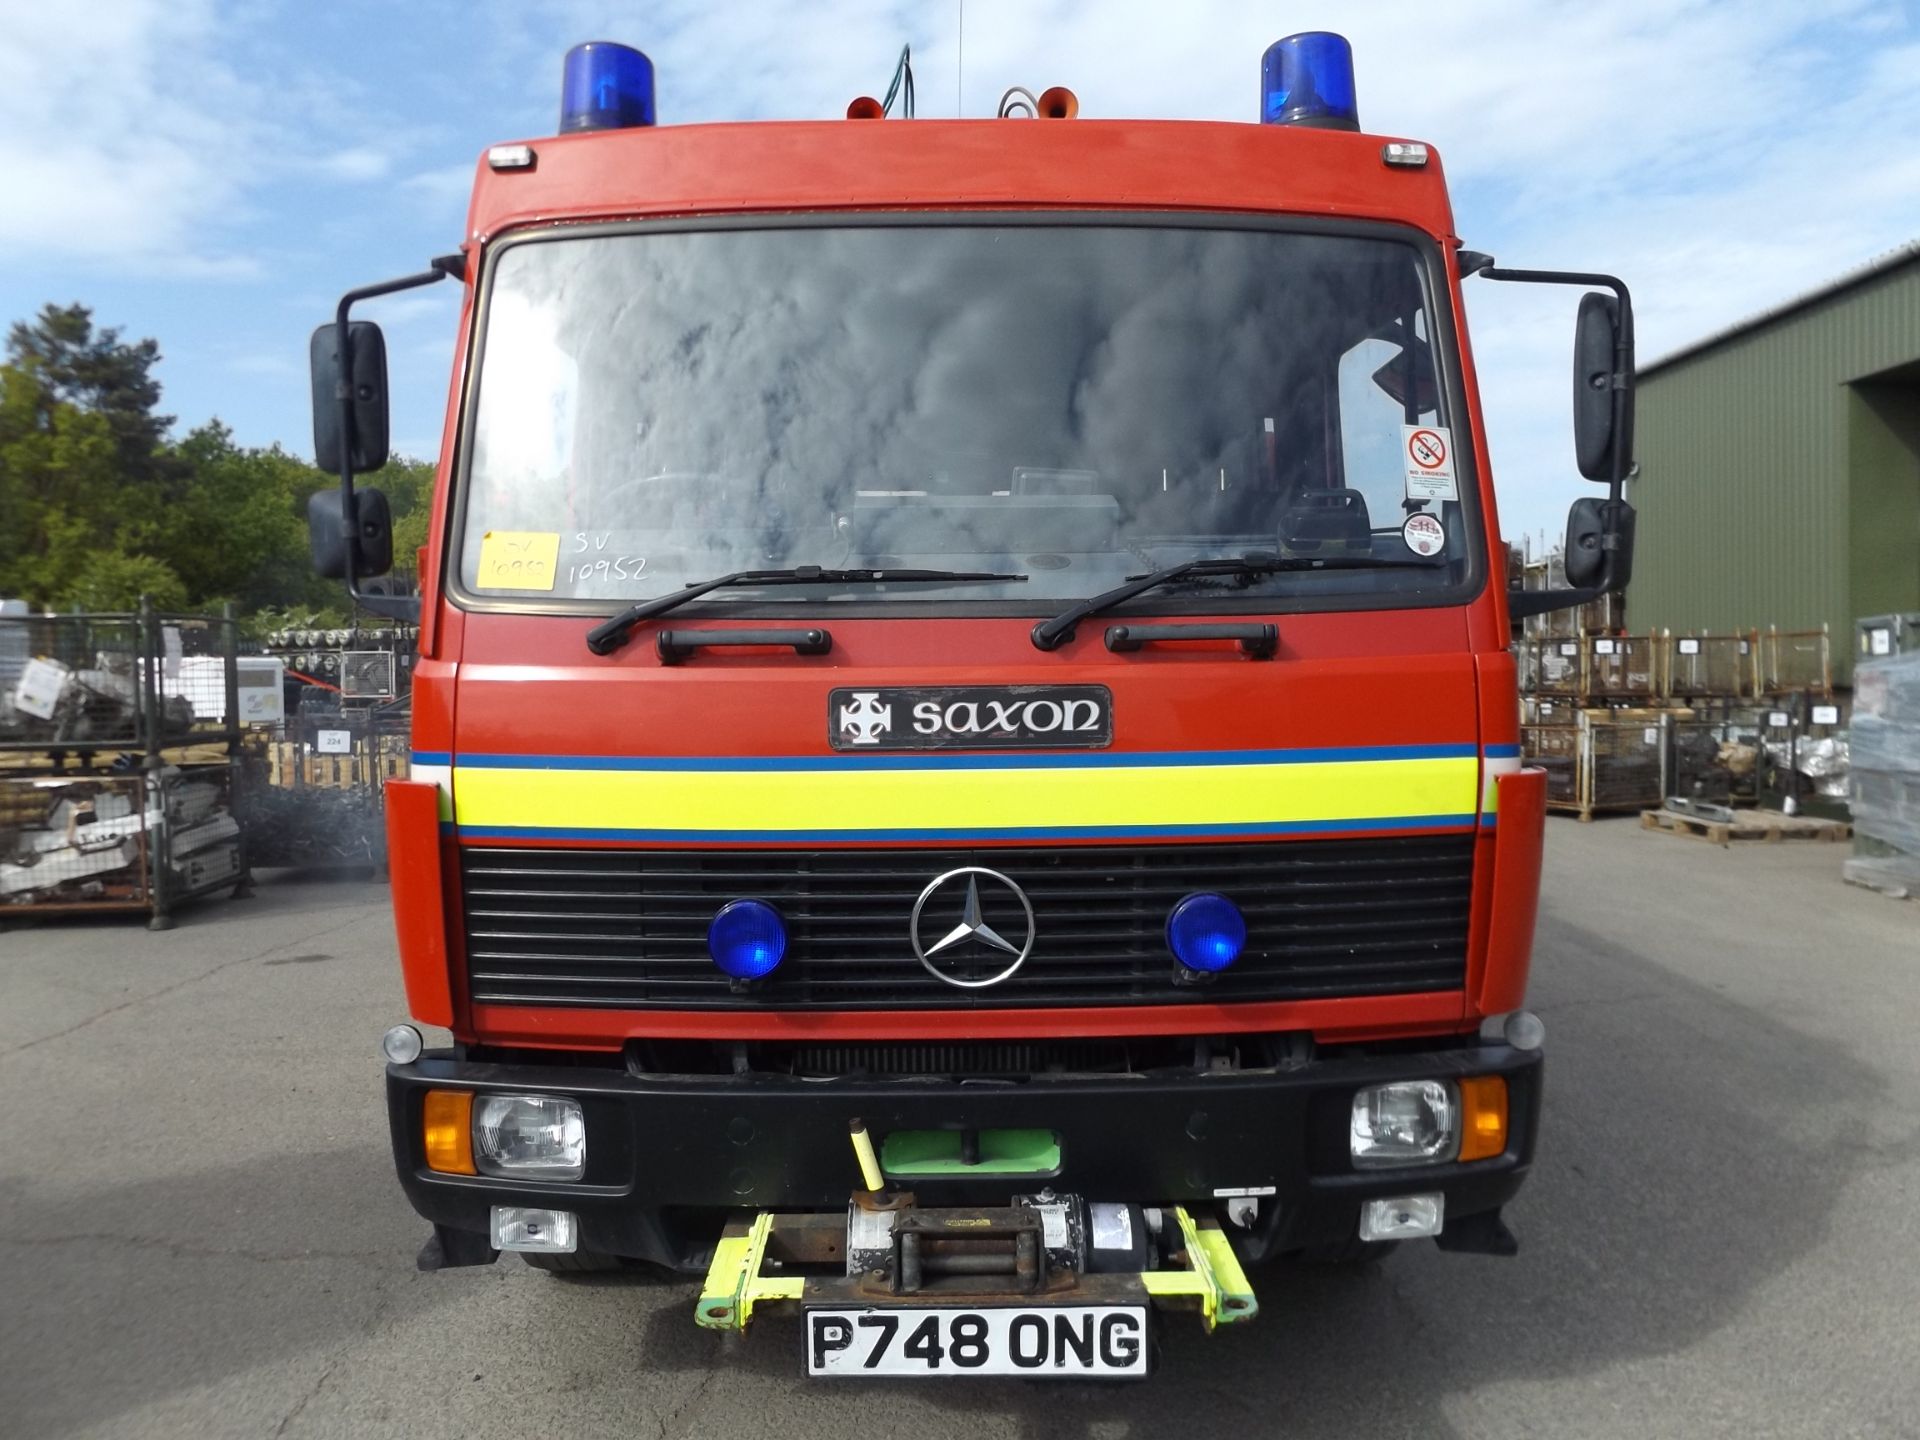 Mercedes 1124 Excaliber Fire Engine - Image 2 of 17